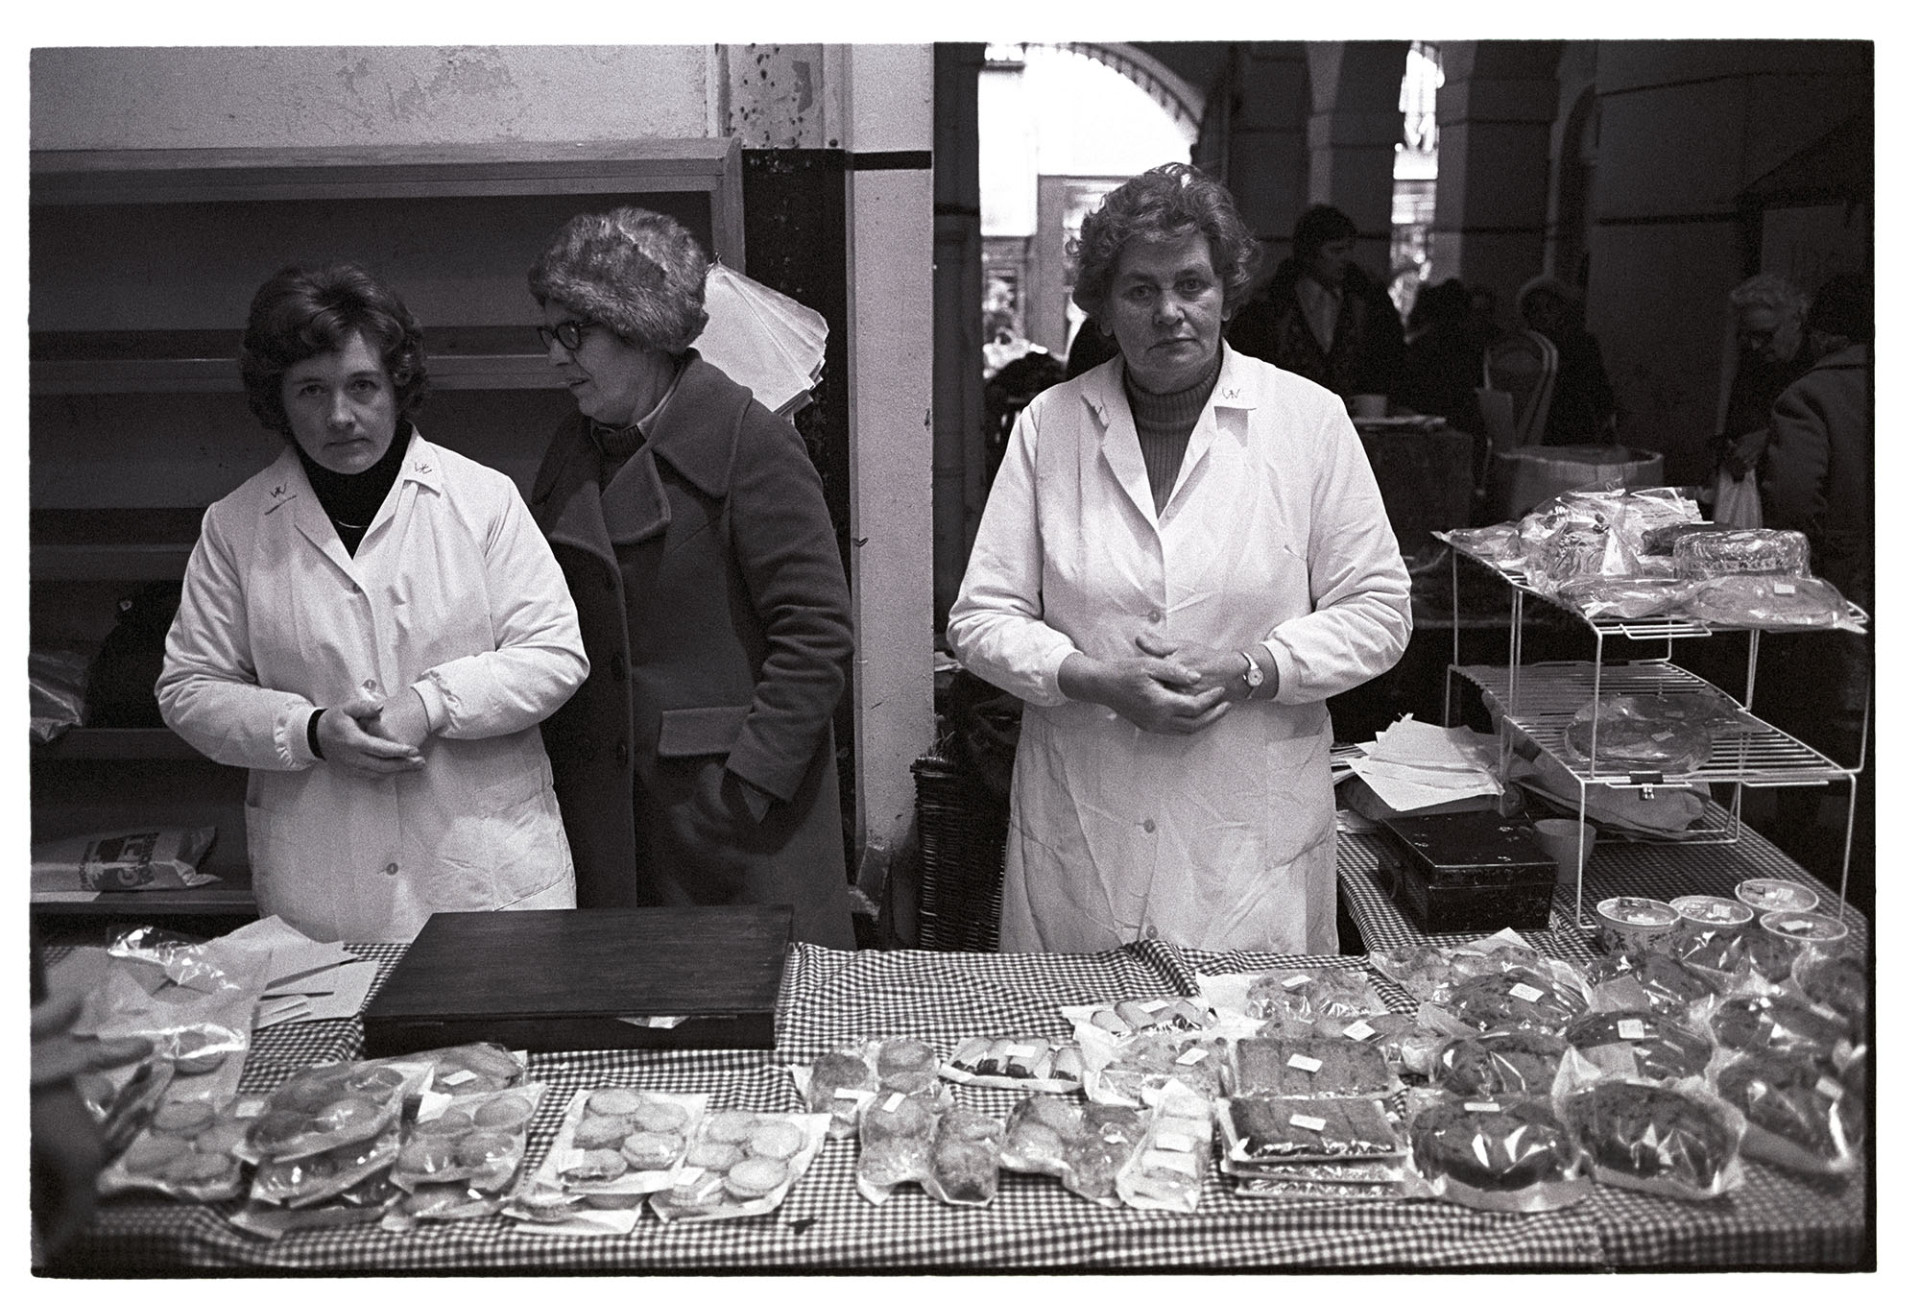 Stall at Pannier Market. Women's Institute cake stall. 
[Rene Ware, stood on the right, and another woman serving on the Women's Institute cake stall at Barnstaple Pannier Market.]